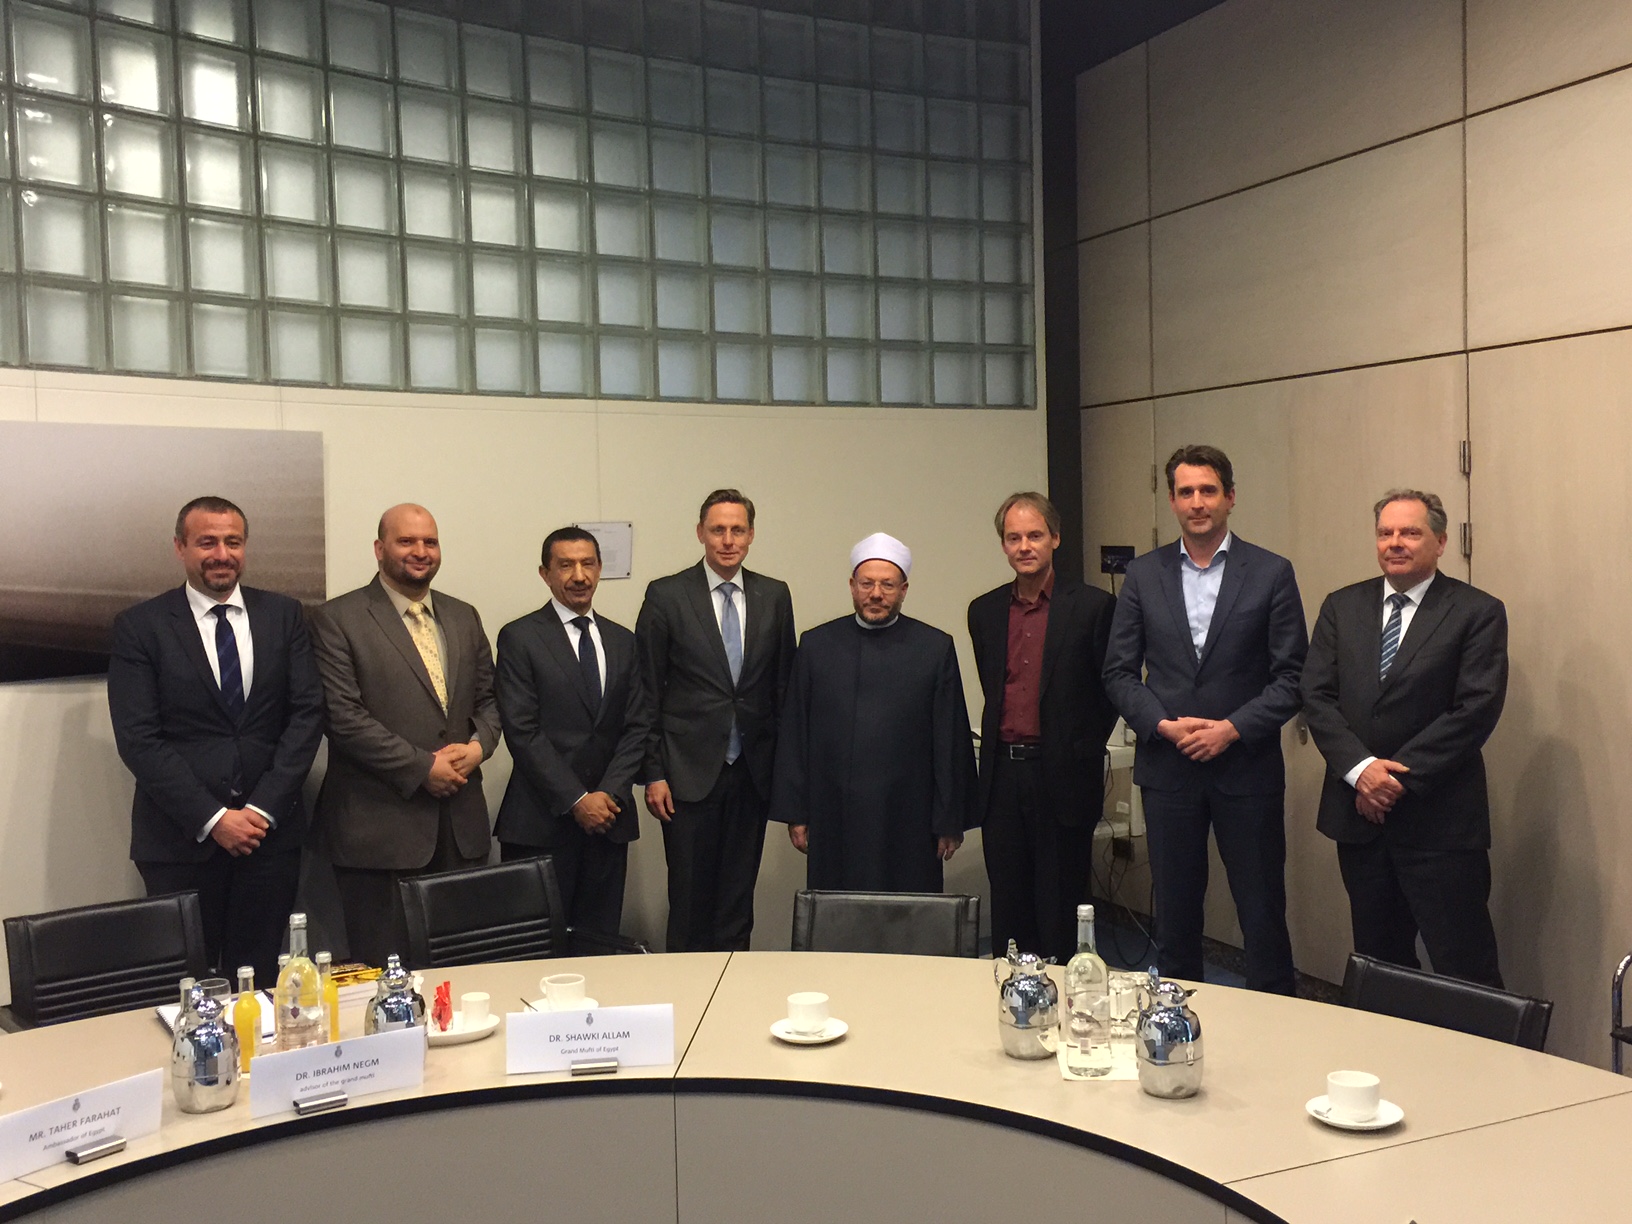 The Grand Mufti of Egypt meets with the foreign relations committee in the Dutch parliament